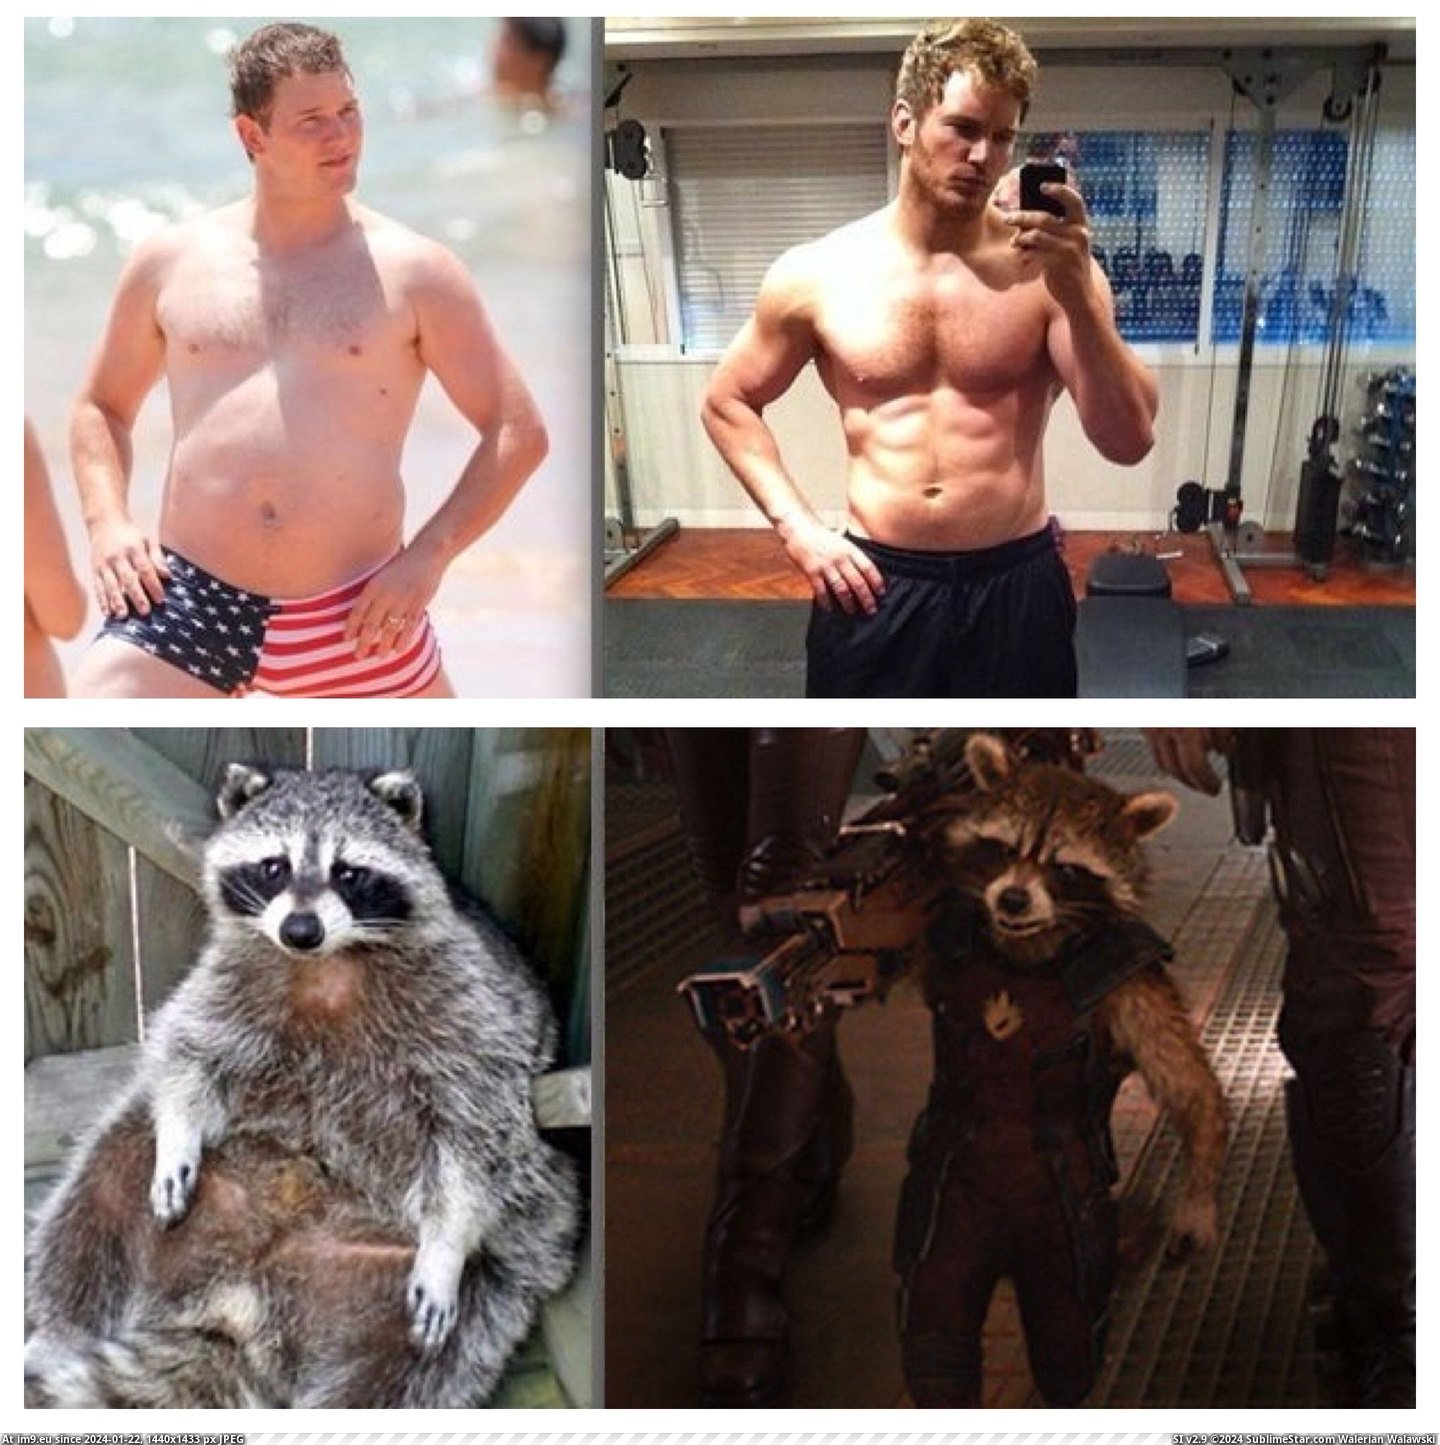 #Funny #One #Isn #Guardians #Pratt #Worked #Chris #Galaxy [Funny] Chris Pratt isn't the only one who worked out for Guardians of the Galaxy Pic. (Изображение из альбом My r/FUNNY favs))